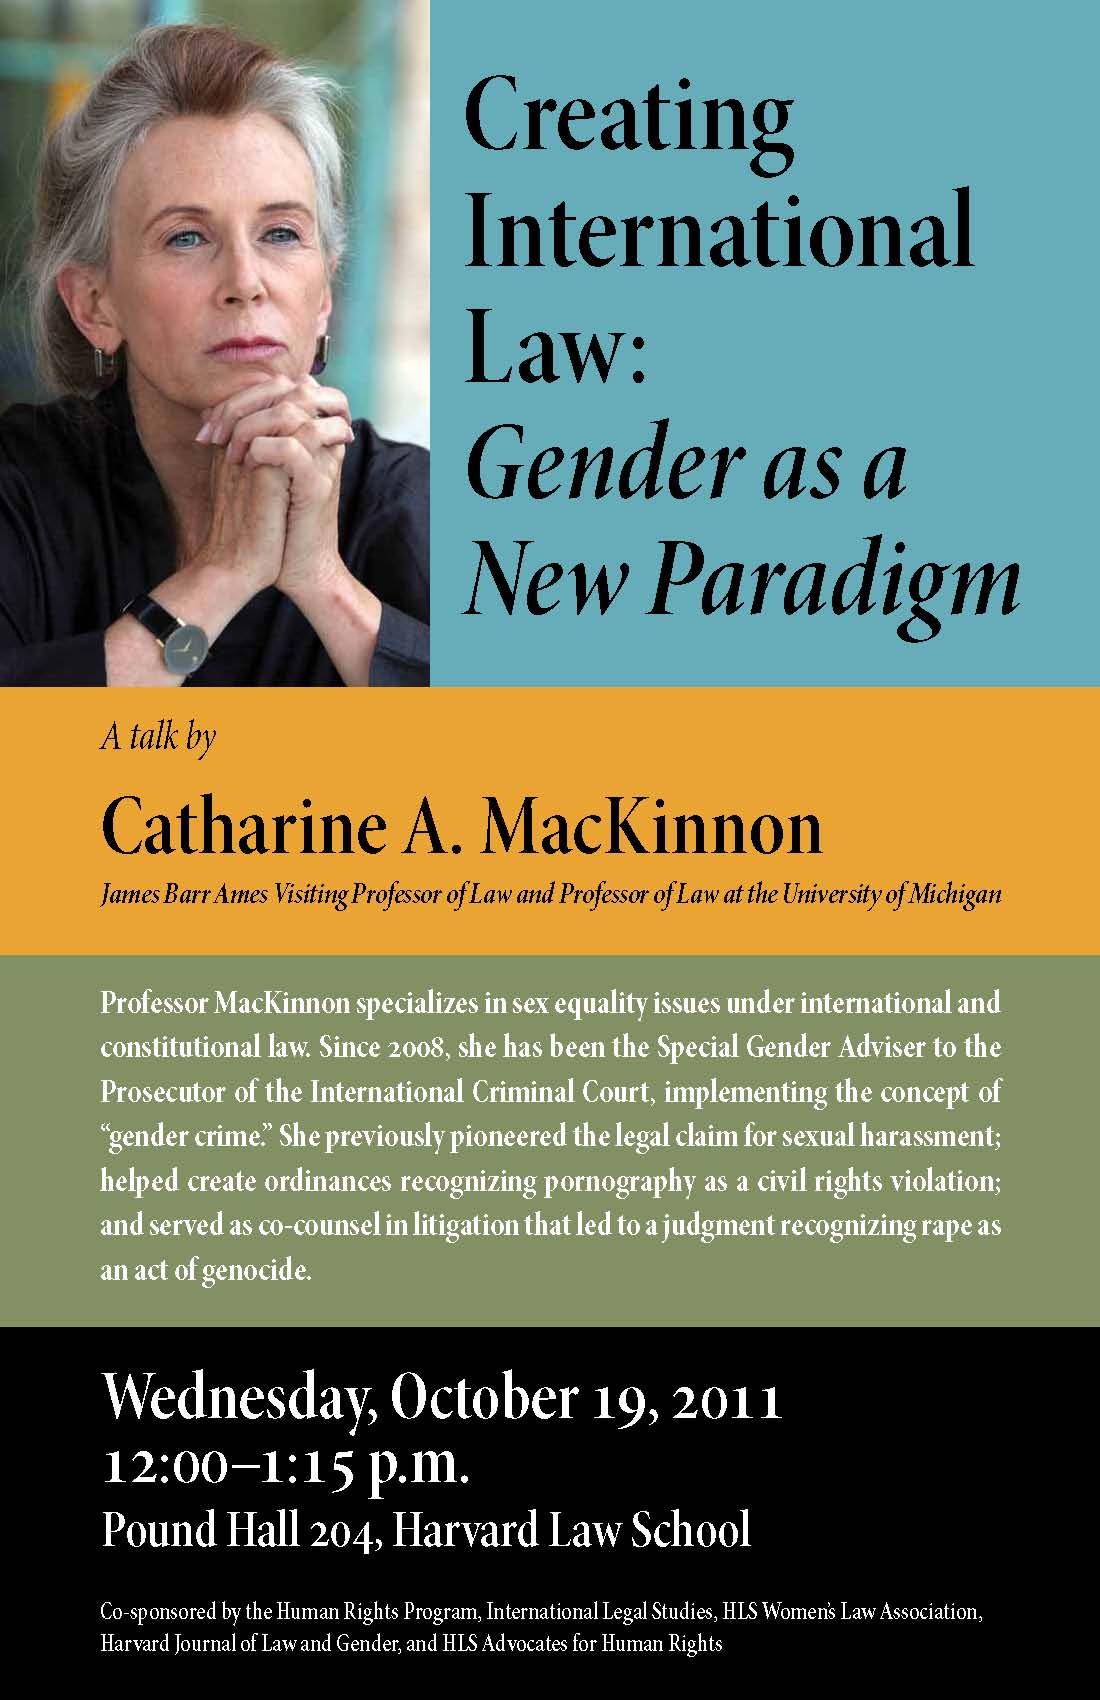 Poster for event displays an image of Catherine MacKinnon alongside text describing the event and where and when it'll take place.